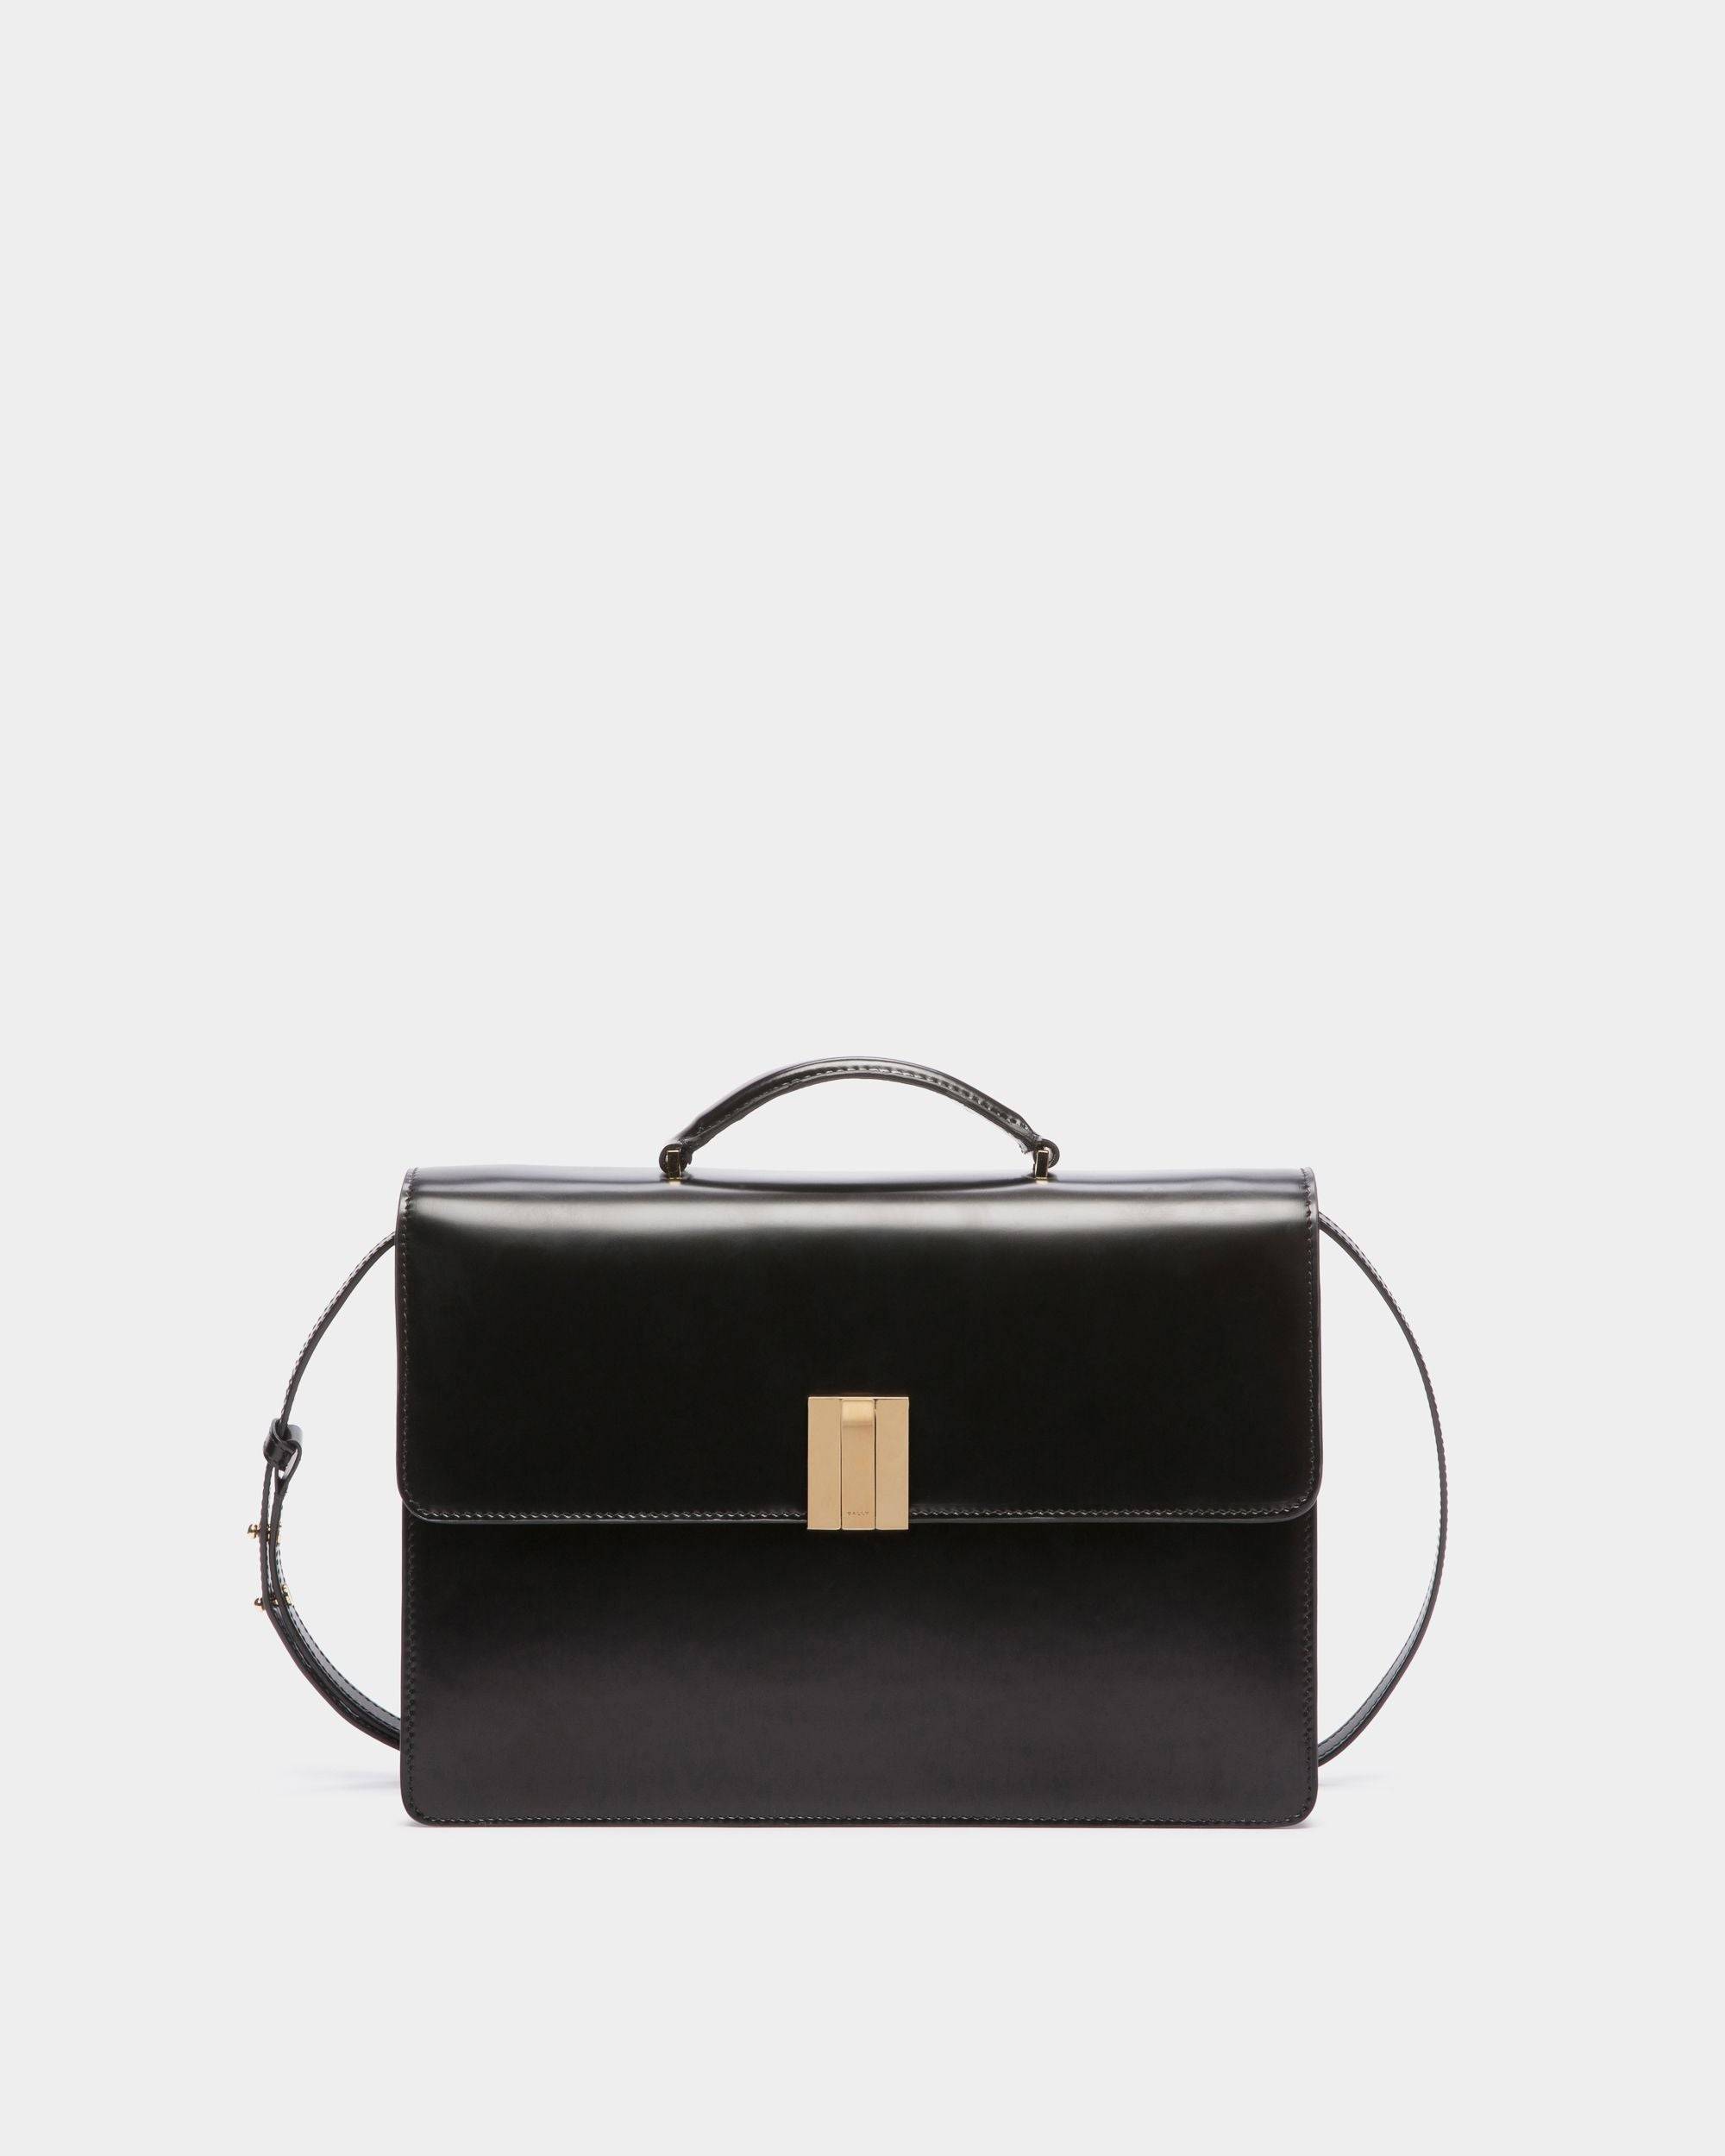 Ollam | Women's Top Handle Bag in Black Brushed Leather | Bally | Still Life Front